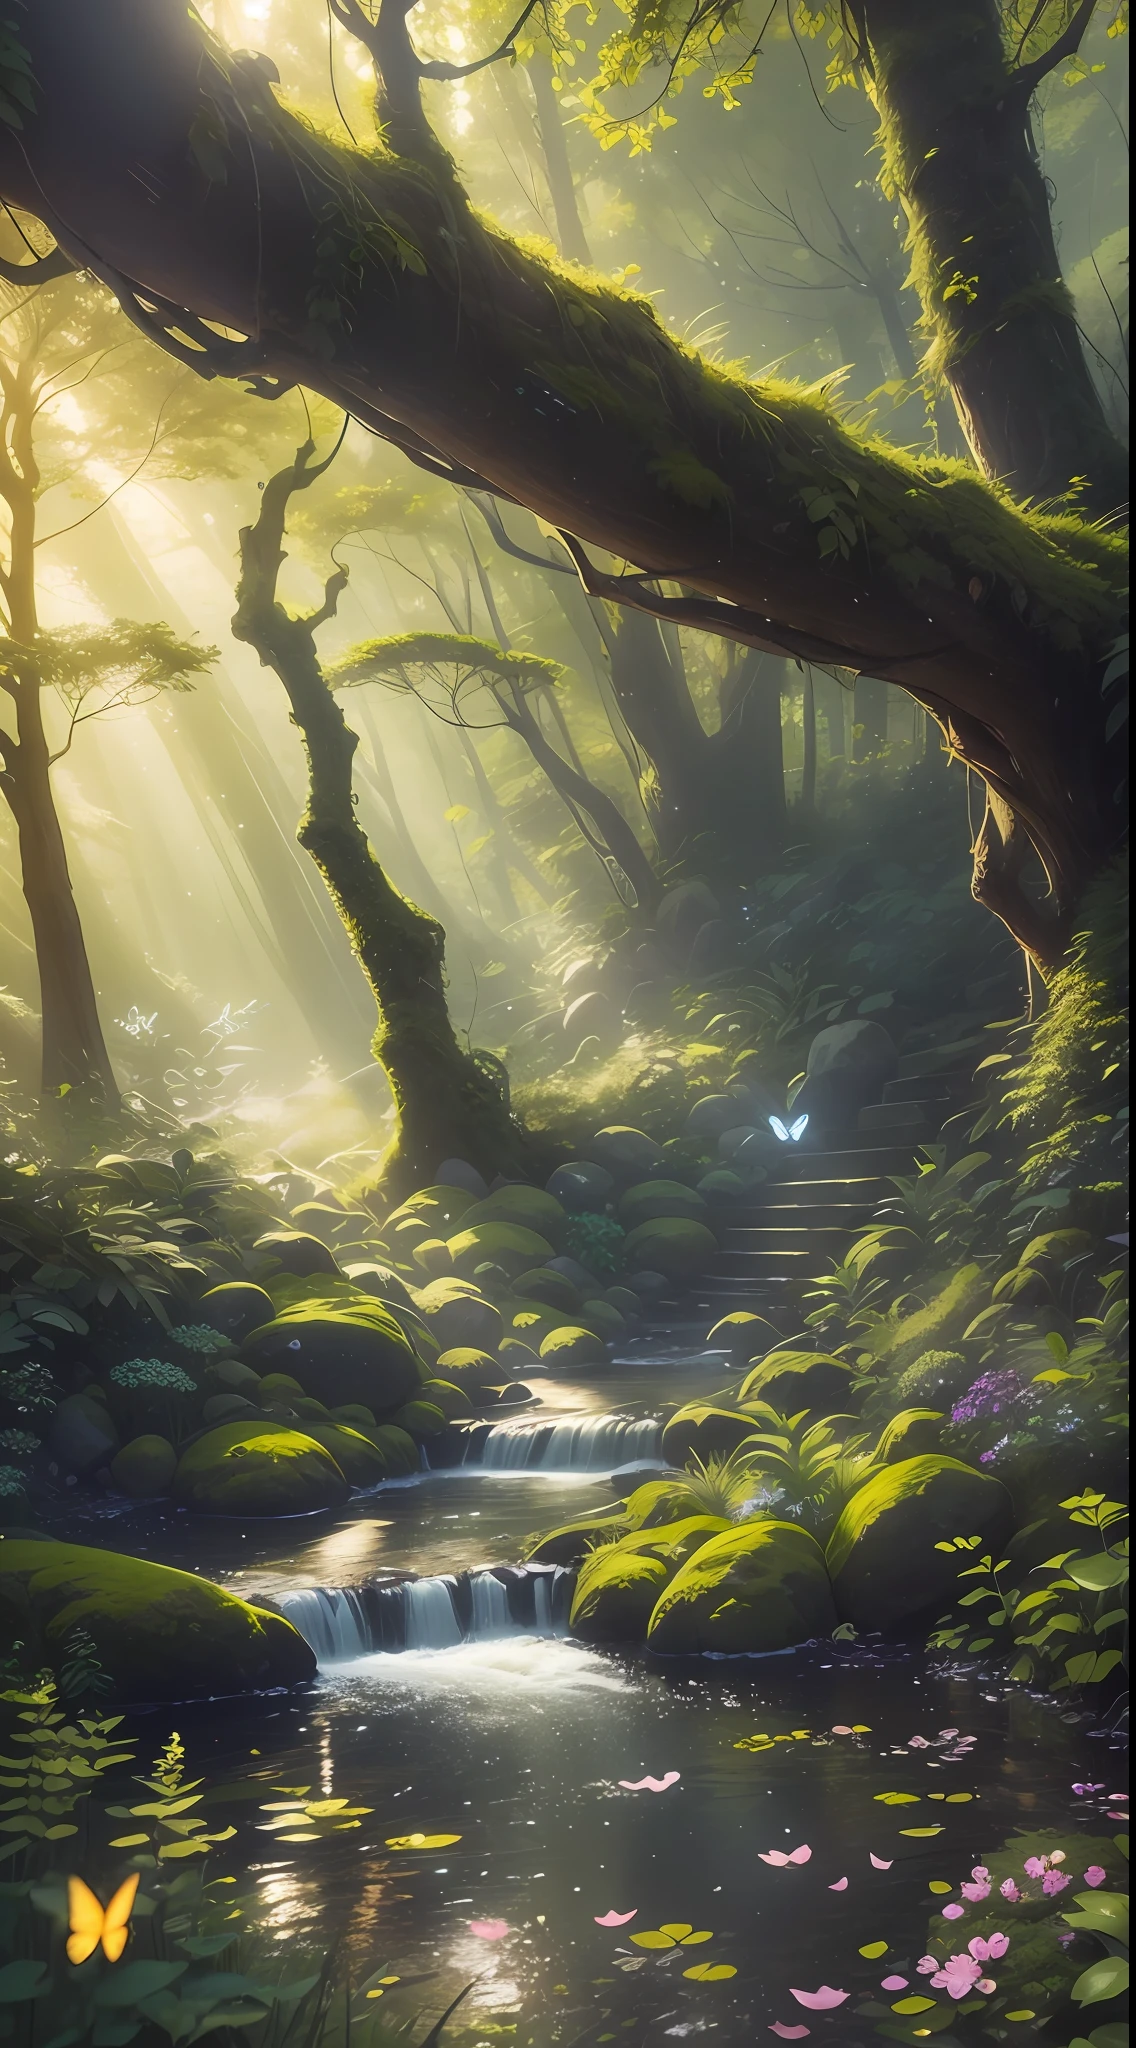 A breathtaking forest scene with tall trees reaching for the sky, sunlight filtering through the leaves, casting a golden glow on the forest floor. Small streams trickle through the moss-covered rocks, creating a serene ambiance. Delicate branches adorned with vibrant flowers and leaves add a touch of color to the scene. Fireflies dance in the air, their gentle glow illuminating the surroundings. The air is filled with a soft melody as butterflies flutter among the blossoms. Capture this enchanting moment in an intricate, high-quality illustration, with attention to the finest details and realistic shadows. Isometric 3D rendering using Octane Render and Ray Tracing will bring this magical forest to life